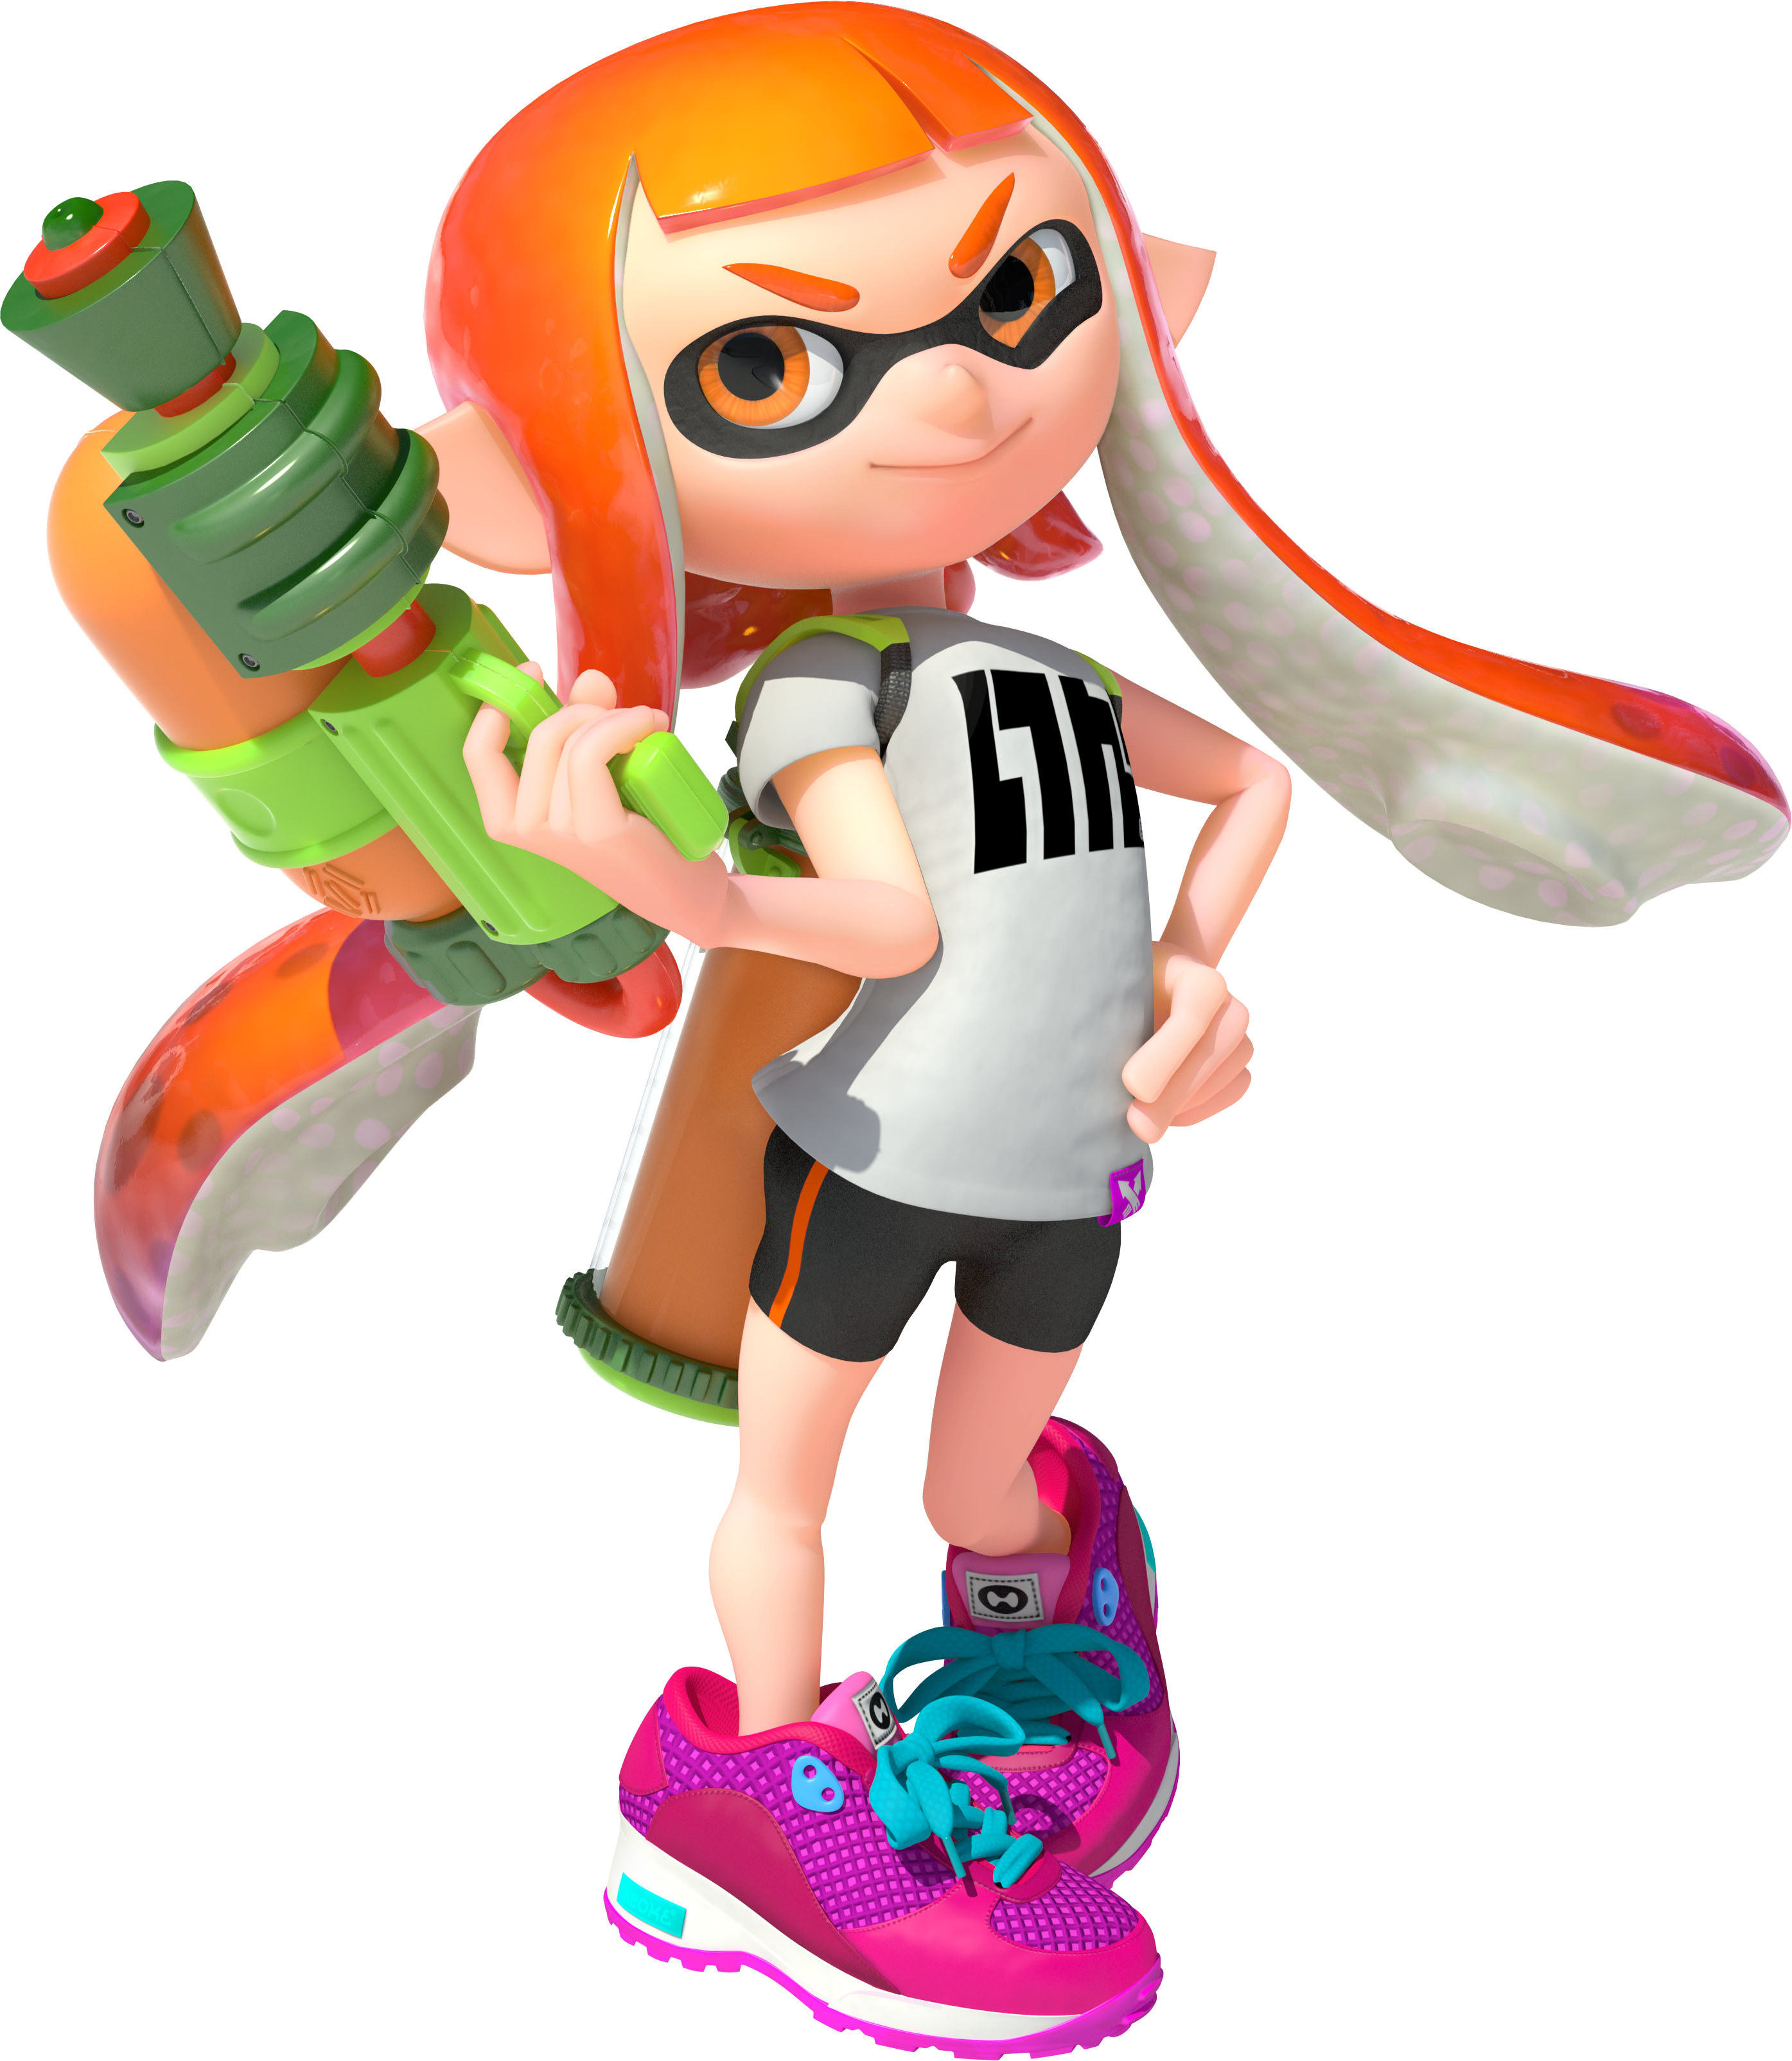 the inkling